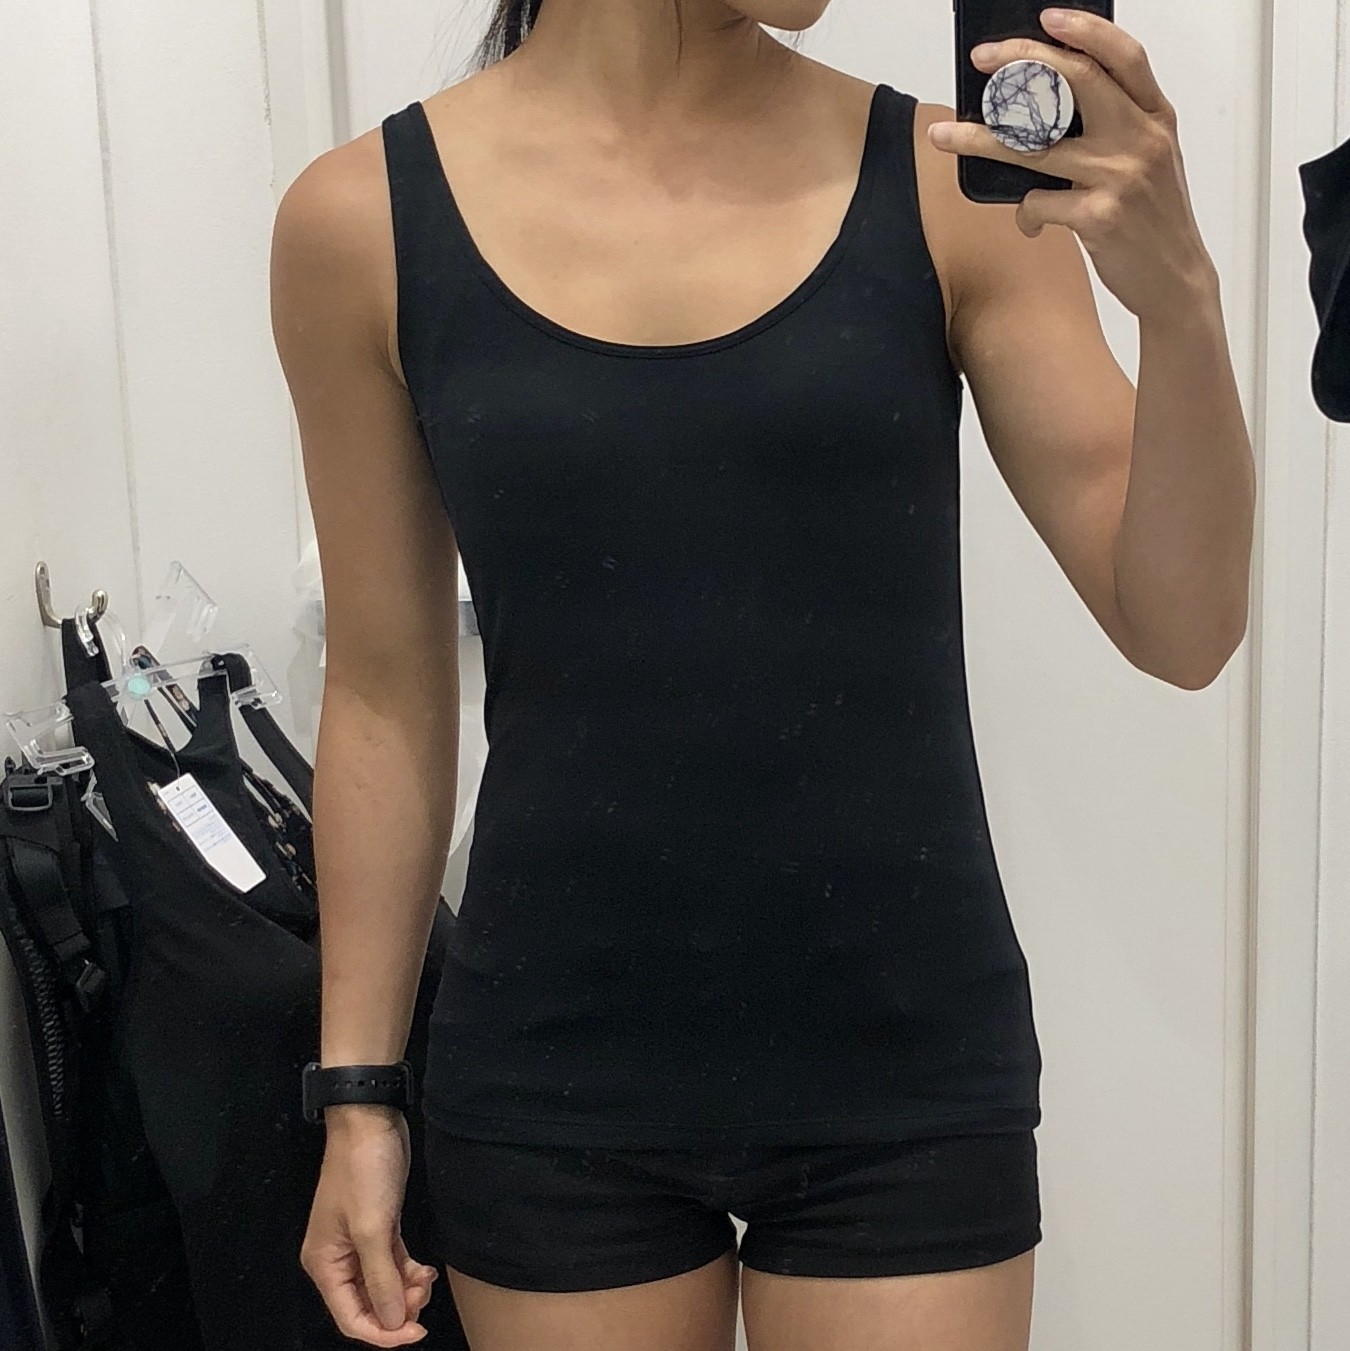 Uniqlo&rsquo;s sleeveless top with built-in bra